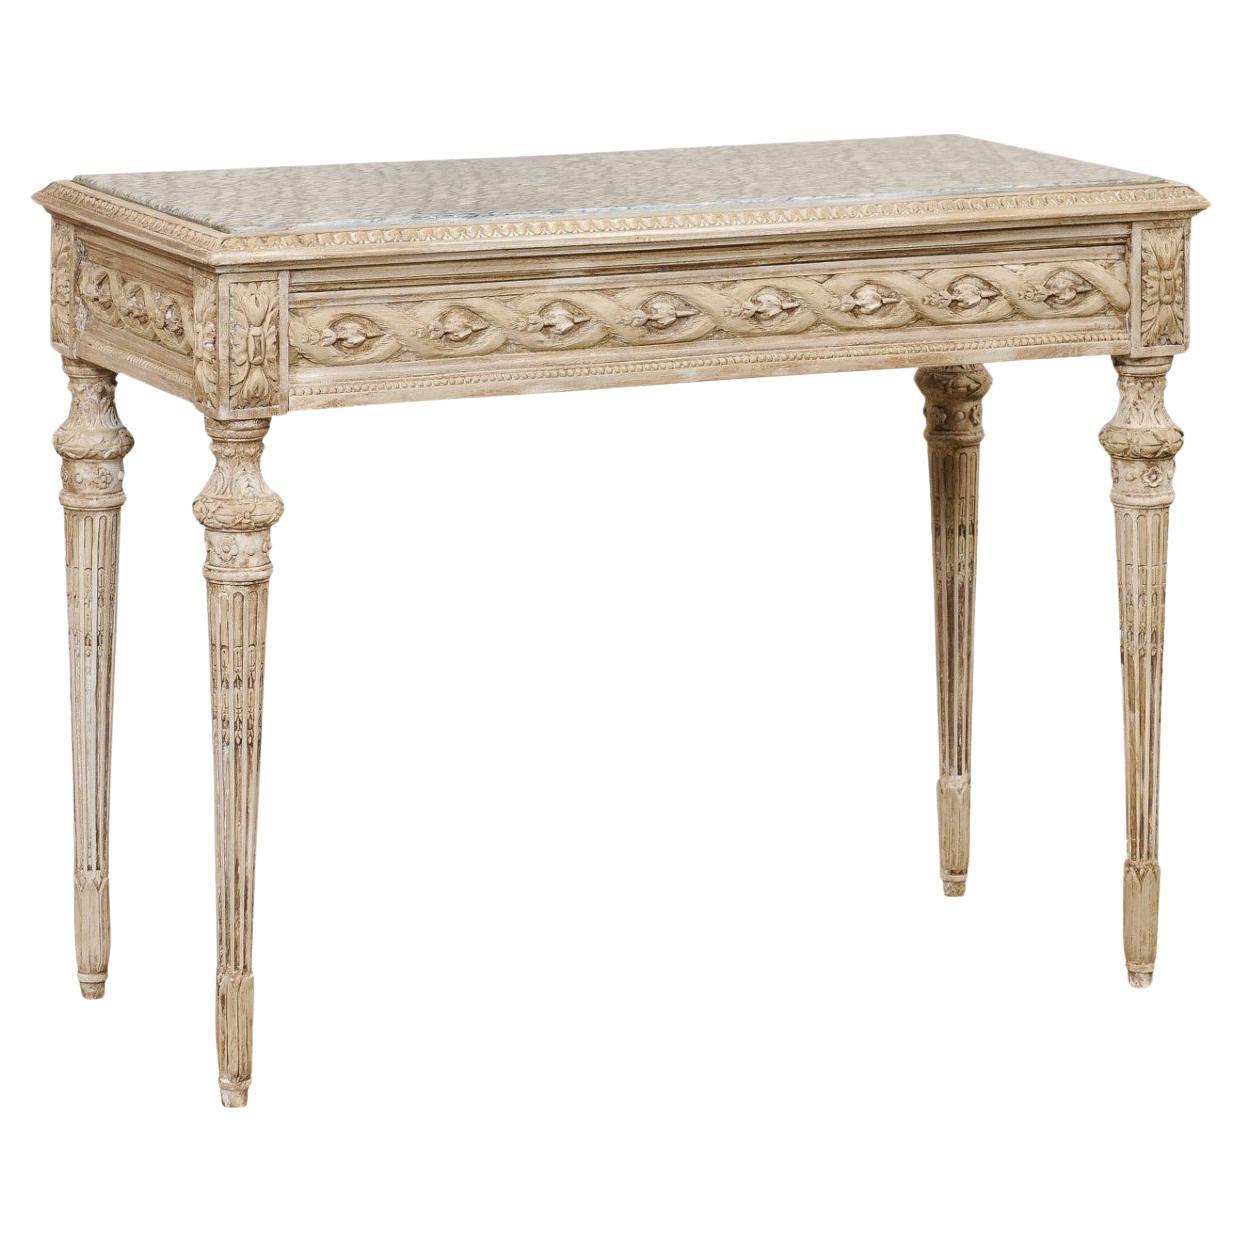 French Beautifully-Carved Marble Top Wooden Console w/Discreetly Hidden Drawer For Sale